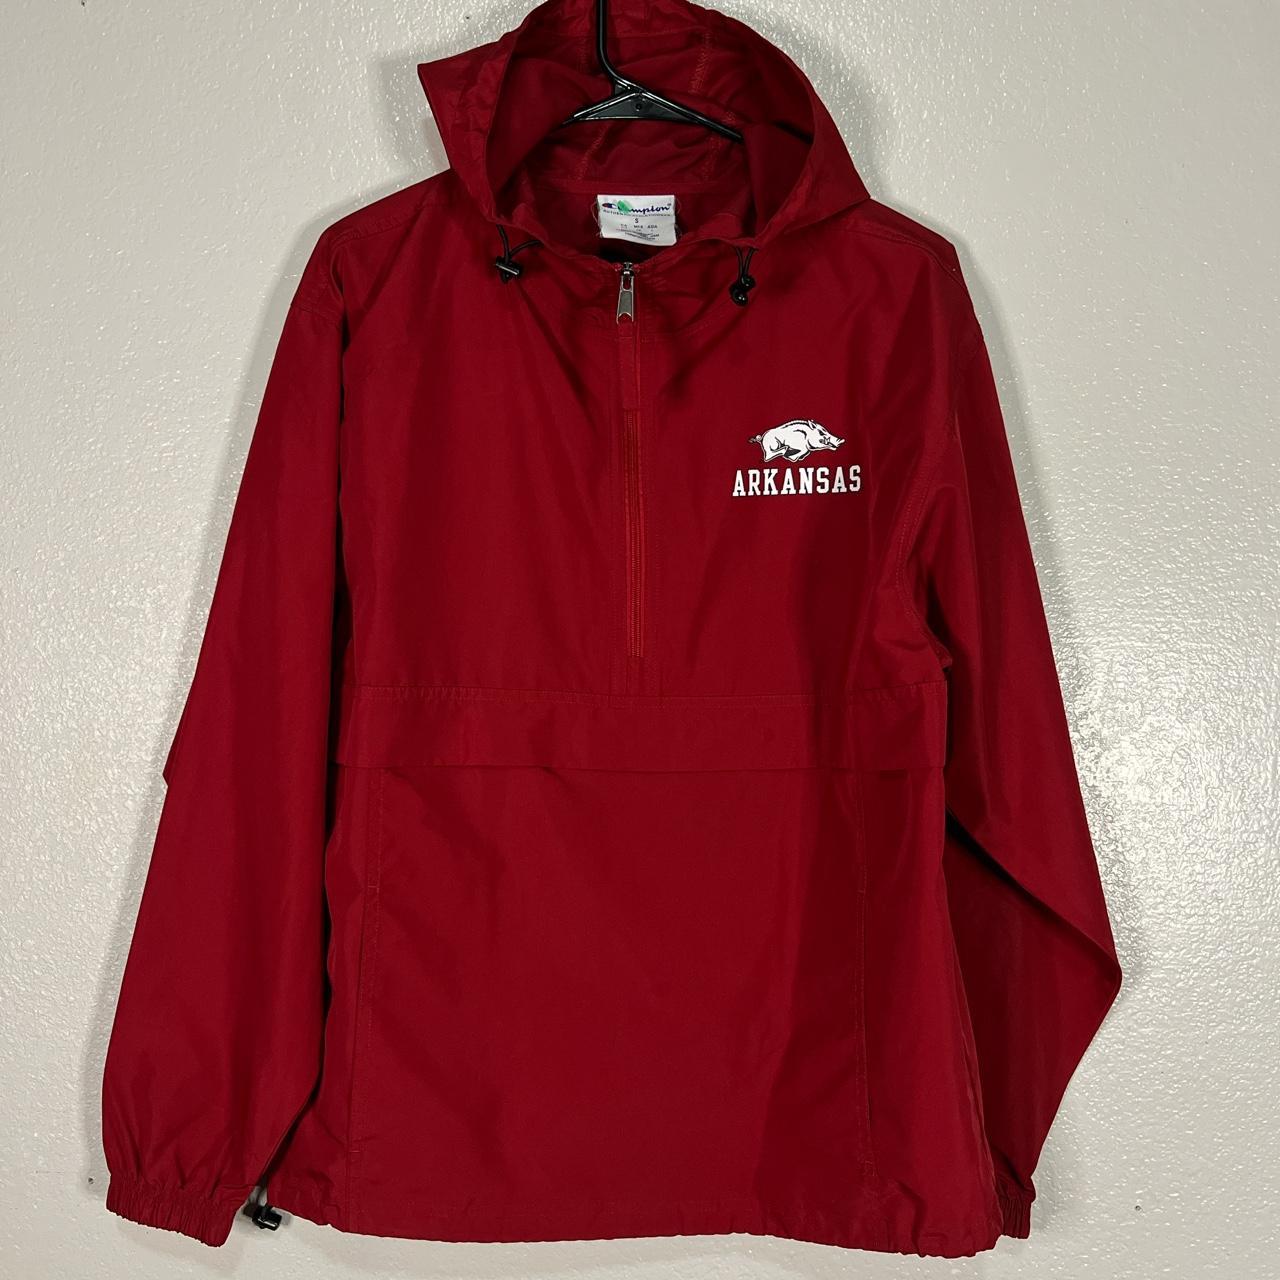 Champion Men's Red and White Jacket